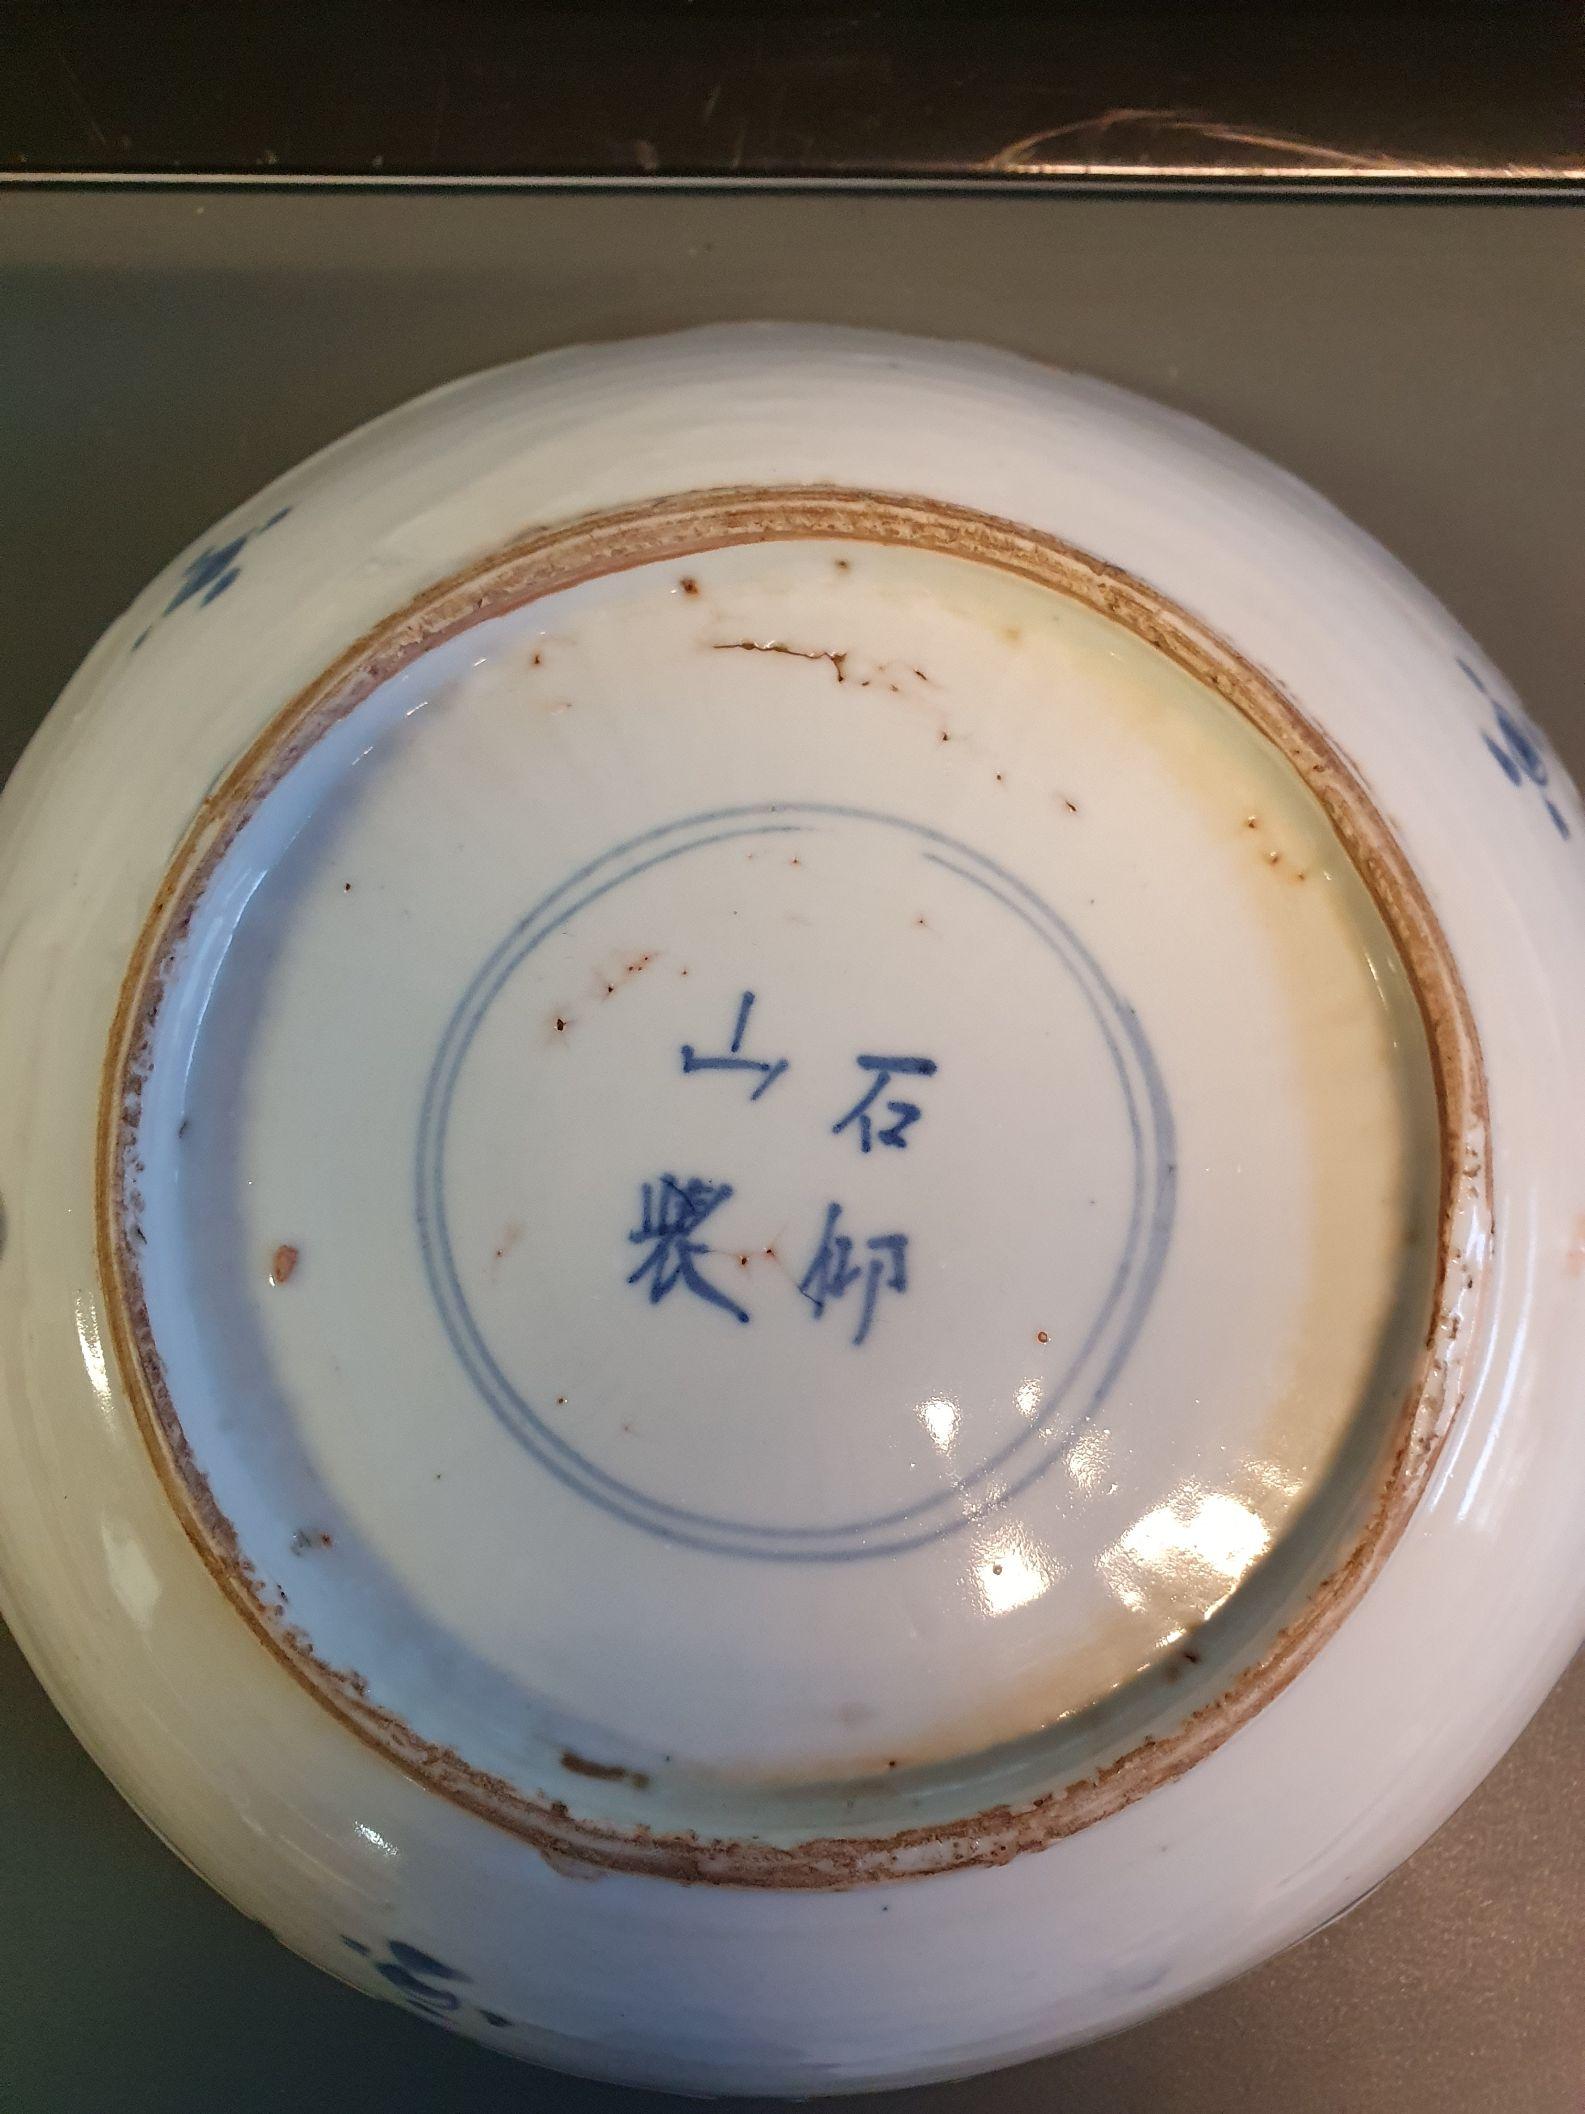 Antique Chinese Porcelain Ca 1600-1640 Kosometsuke Plate Shou Lao 8 Immortals In Good Condition For Sale In Amsterdam, Noord Holland